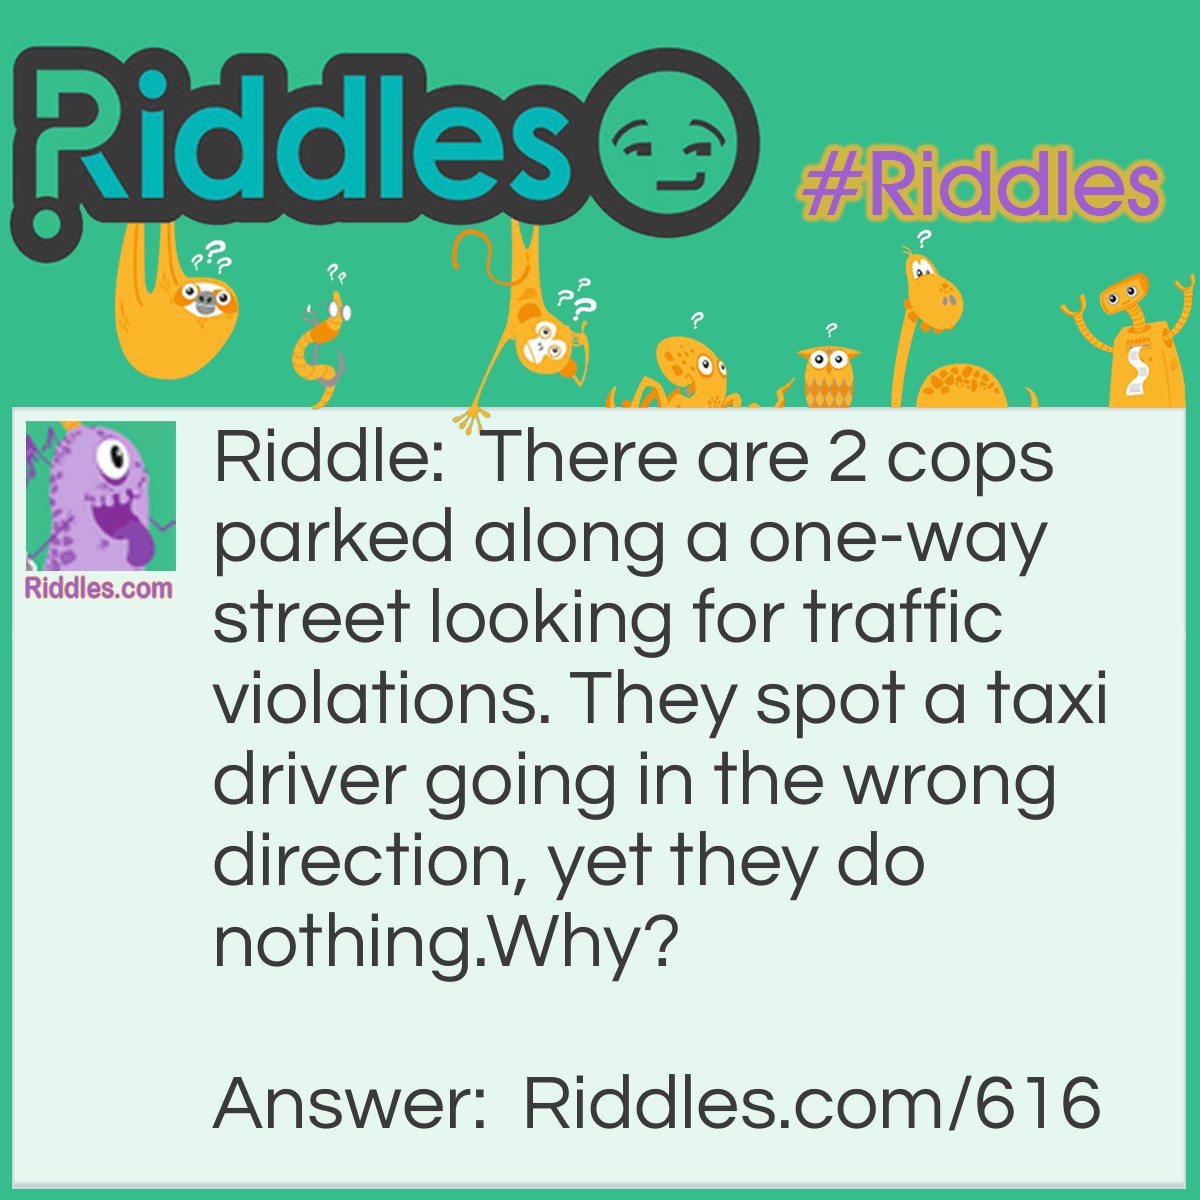 Riddle: There are 2 cops parked along a one-way street looking for traffic violations. They spot a taxi driver going in the wrong direction, yet they do nothing. 
Why? Answer: The taxi driver wasn't driving at the time, he was walking.